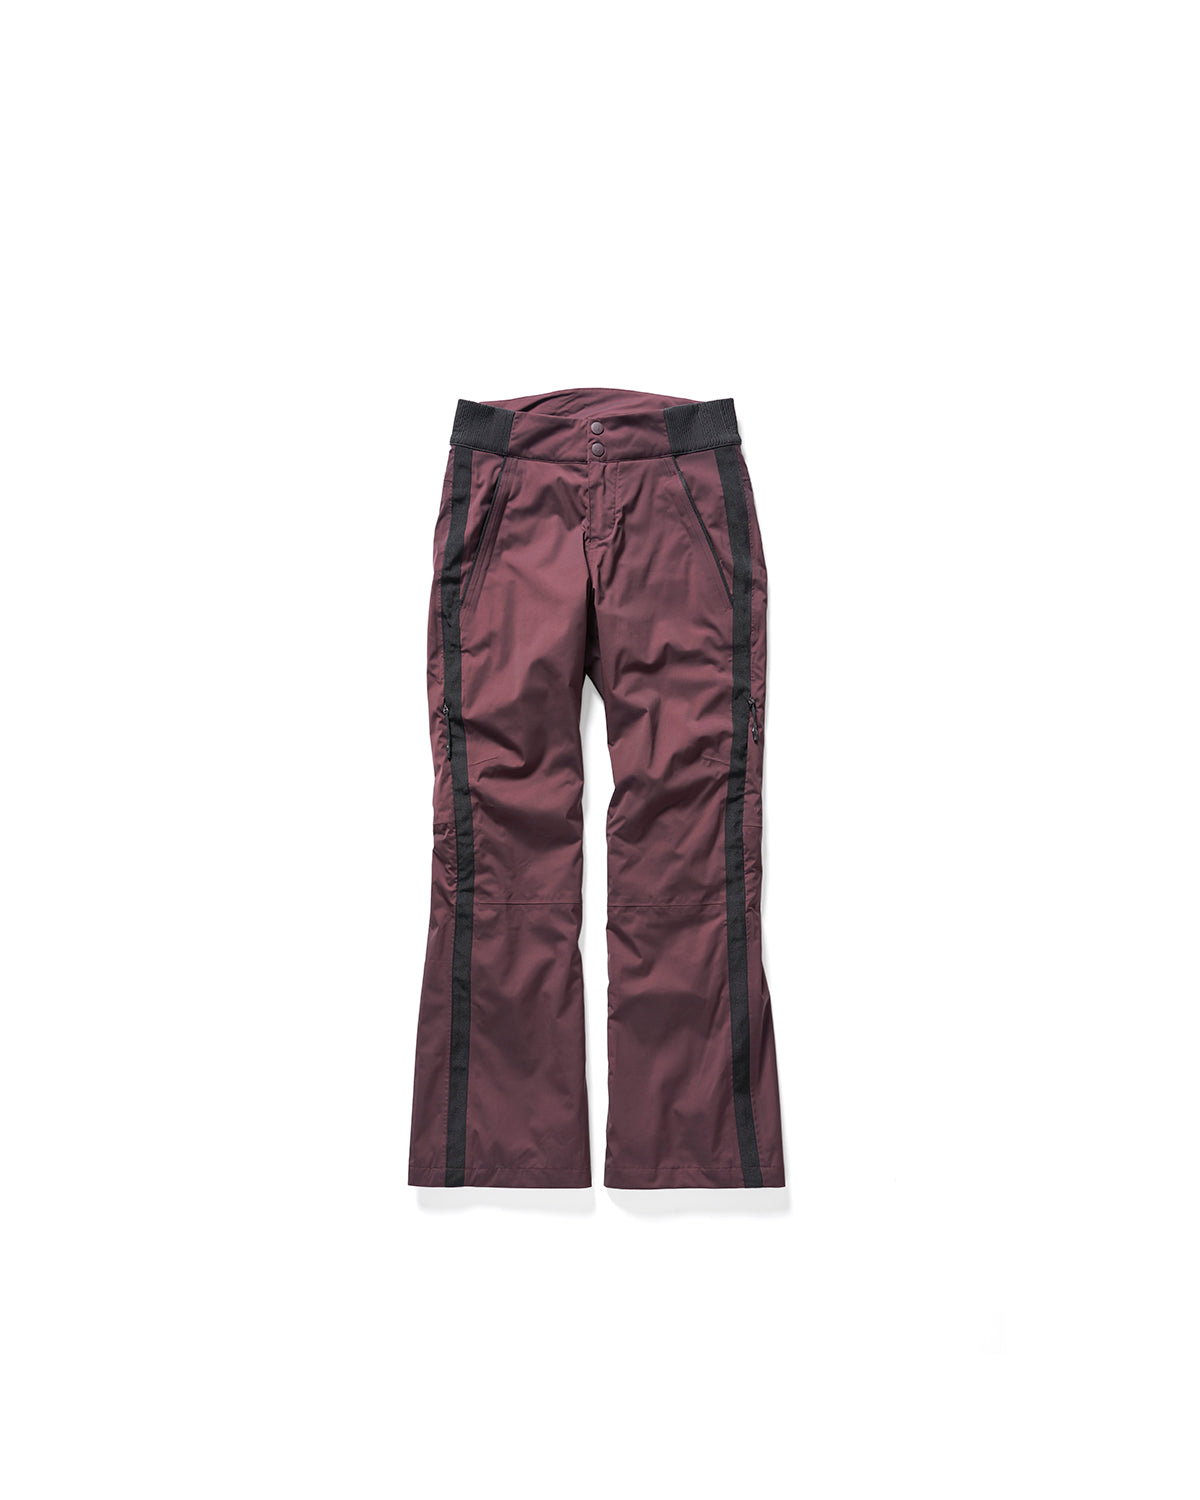 Holden Womens' Insulated Shelby Pant - Winter 2020/2021